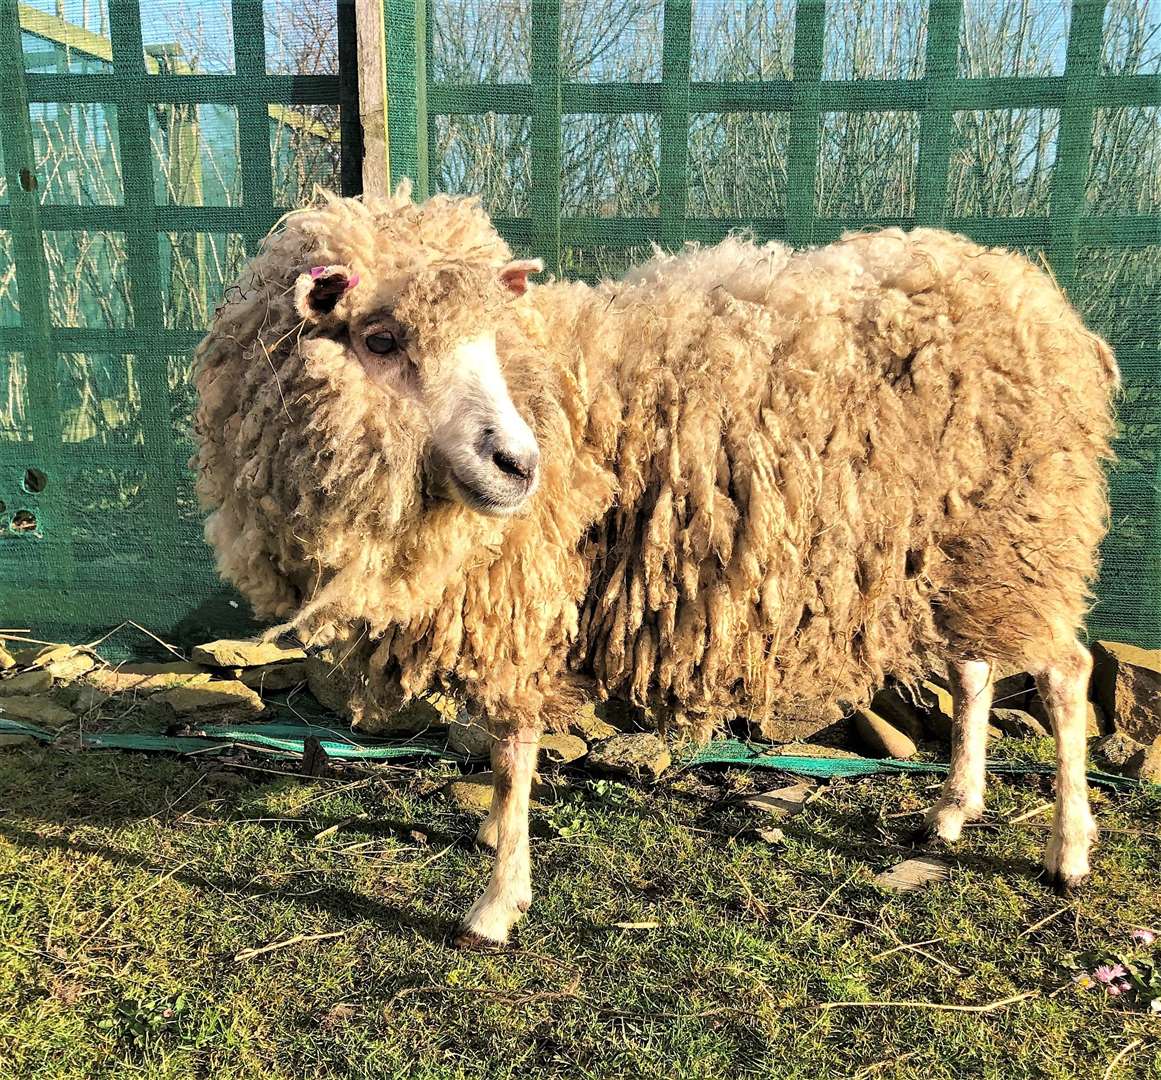 Ray will live her life out on the popular petting farm at John O'Groats. Picture: Puffin Croft